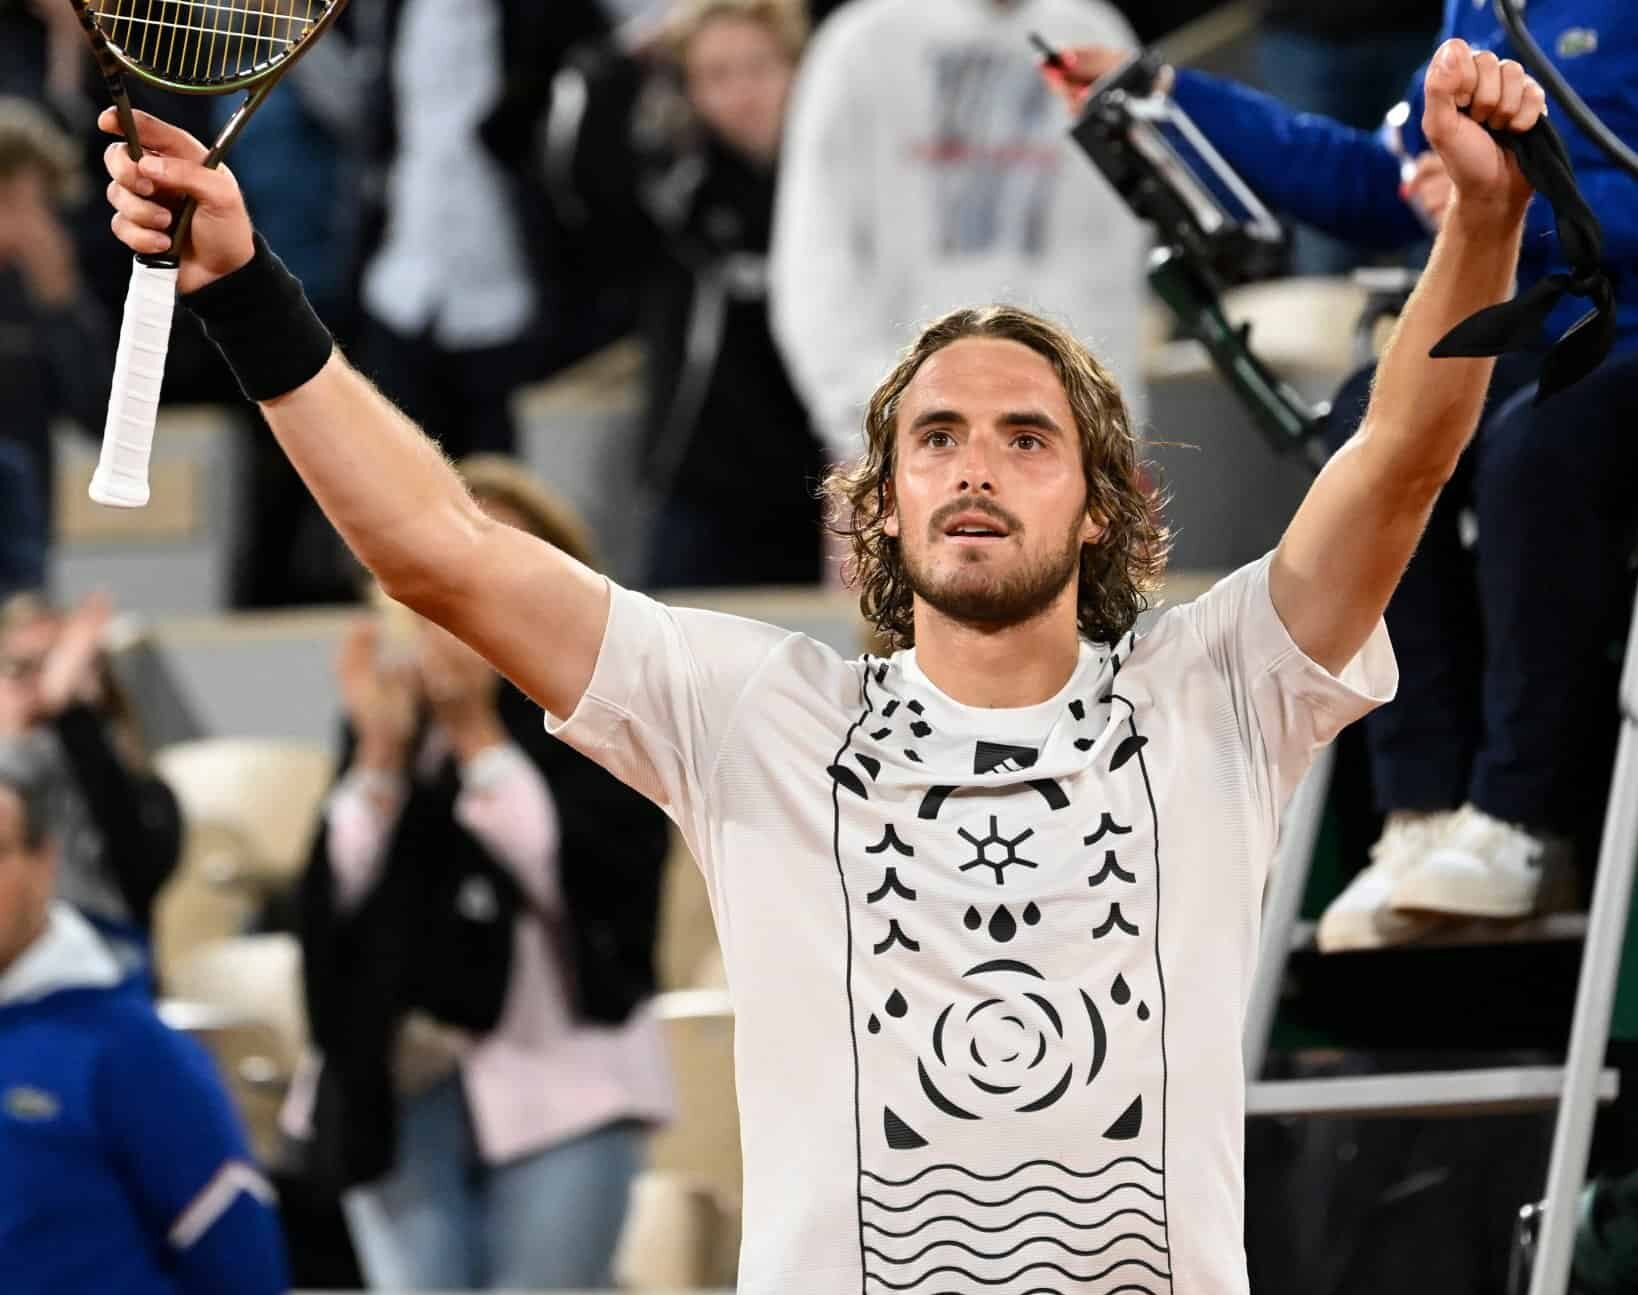 Stefanos Tsitsipas overcomes two sets to love deficit to defeat Musetti and reach round 2 23